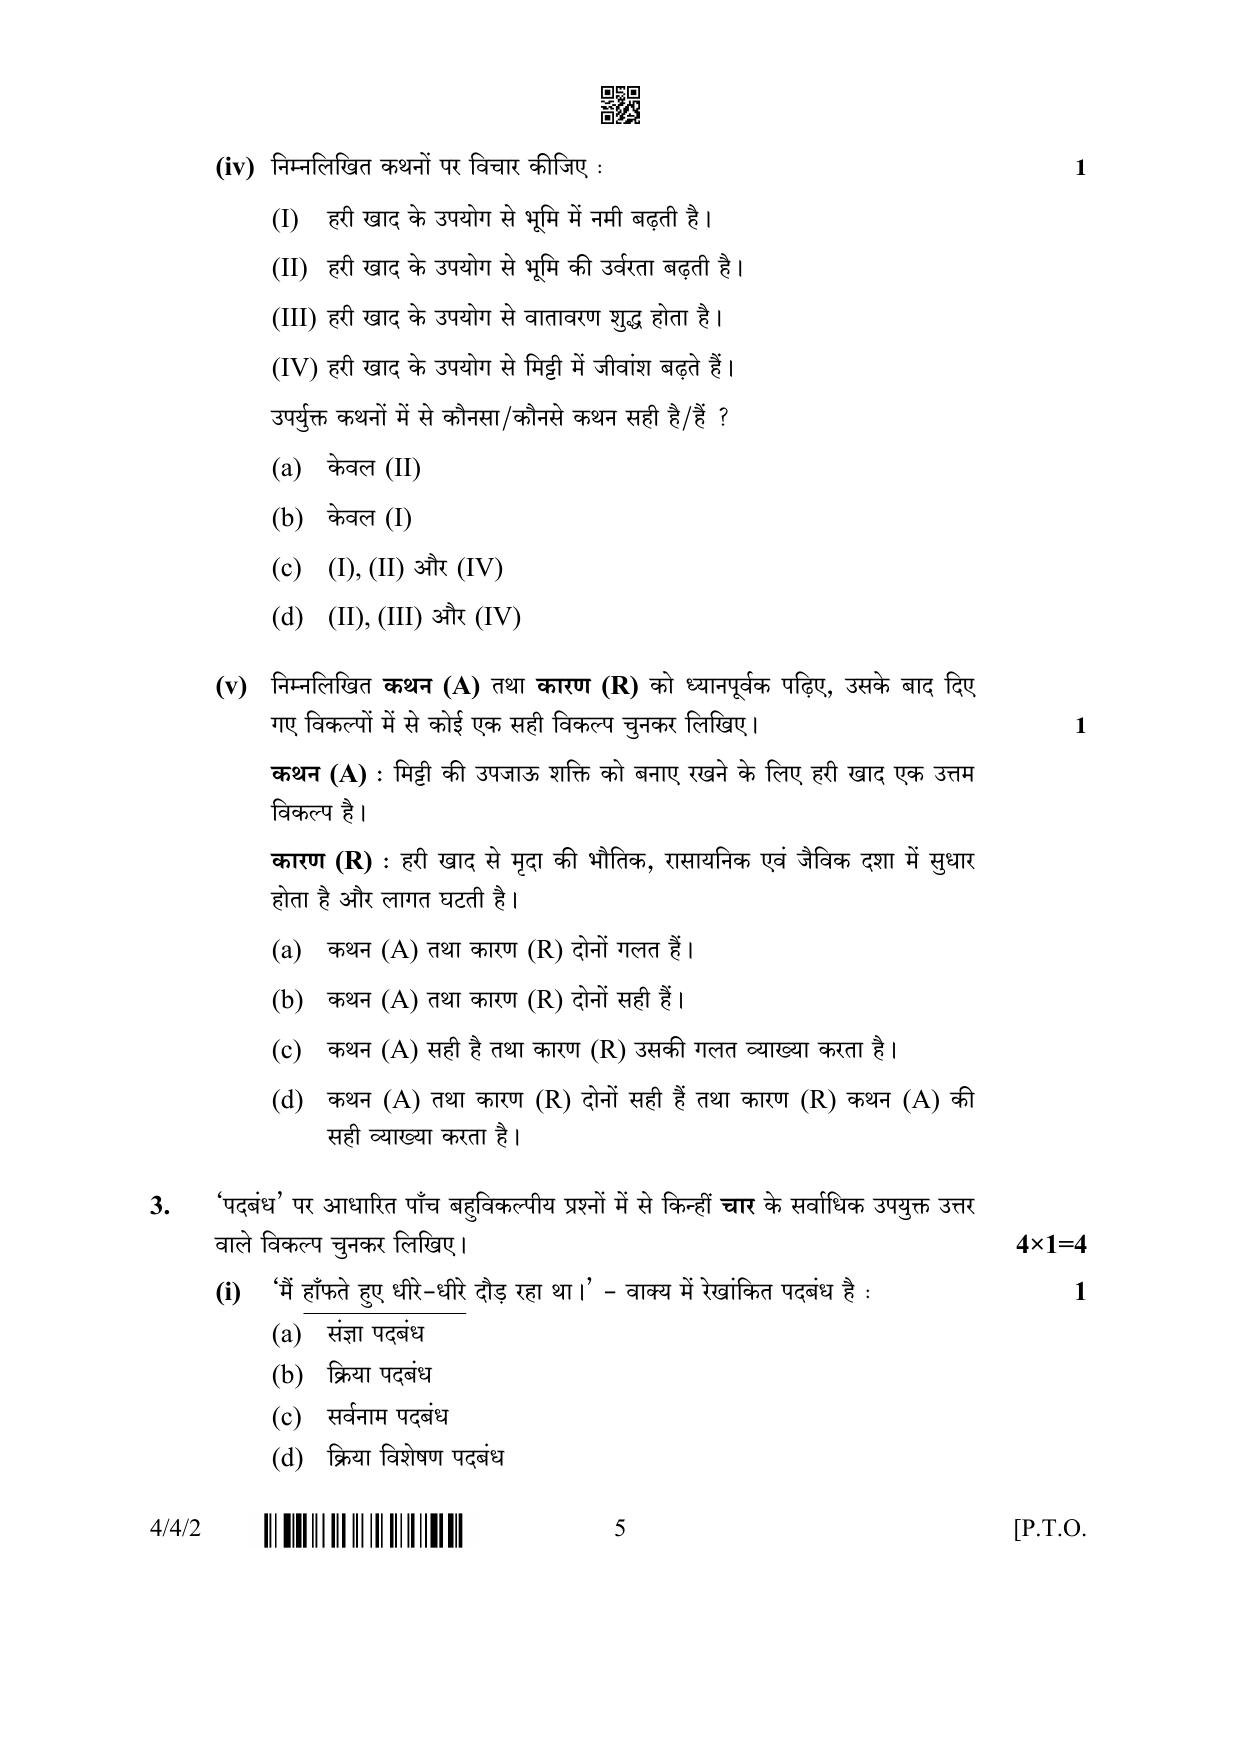 CBSE Class 10 4-4-2 Hindi B 2023 Question Paper - Page 5